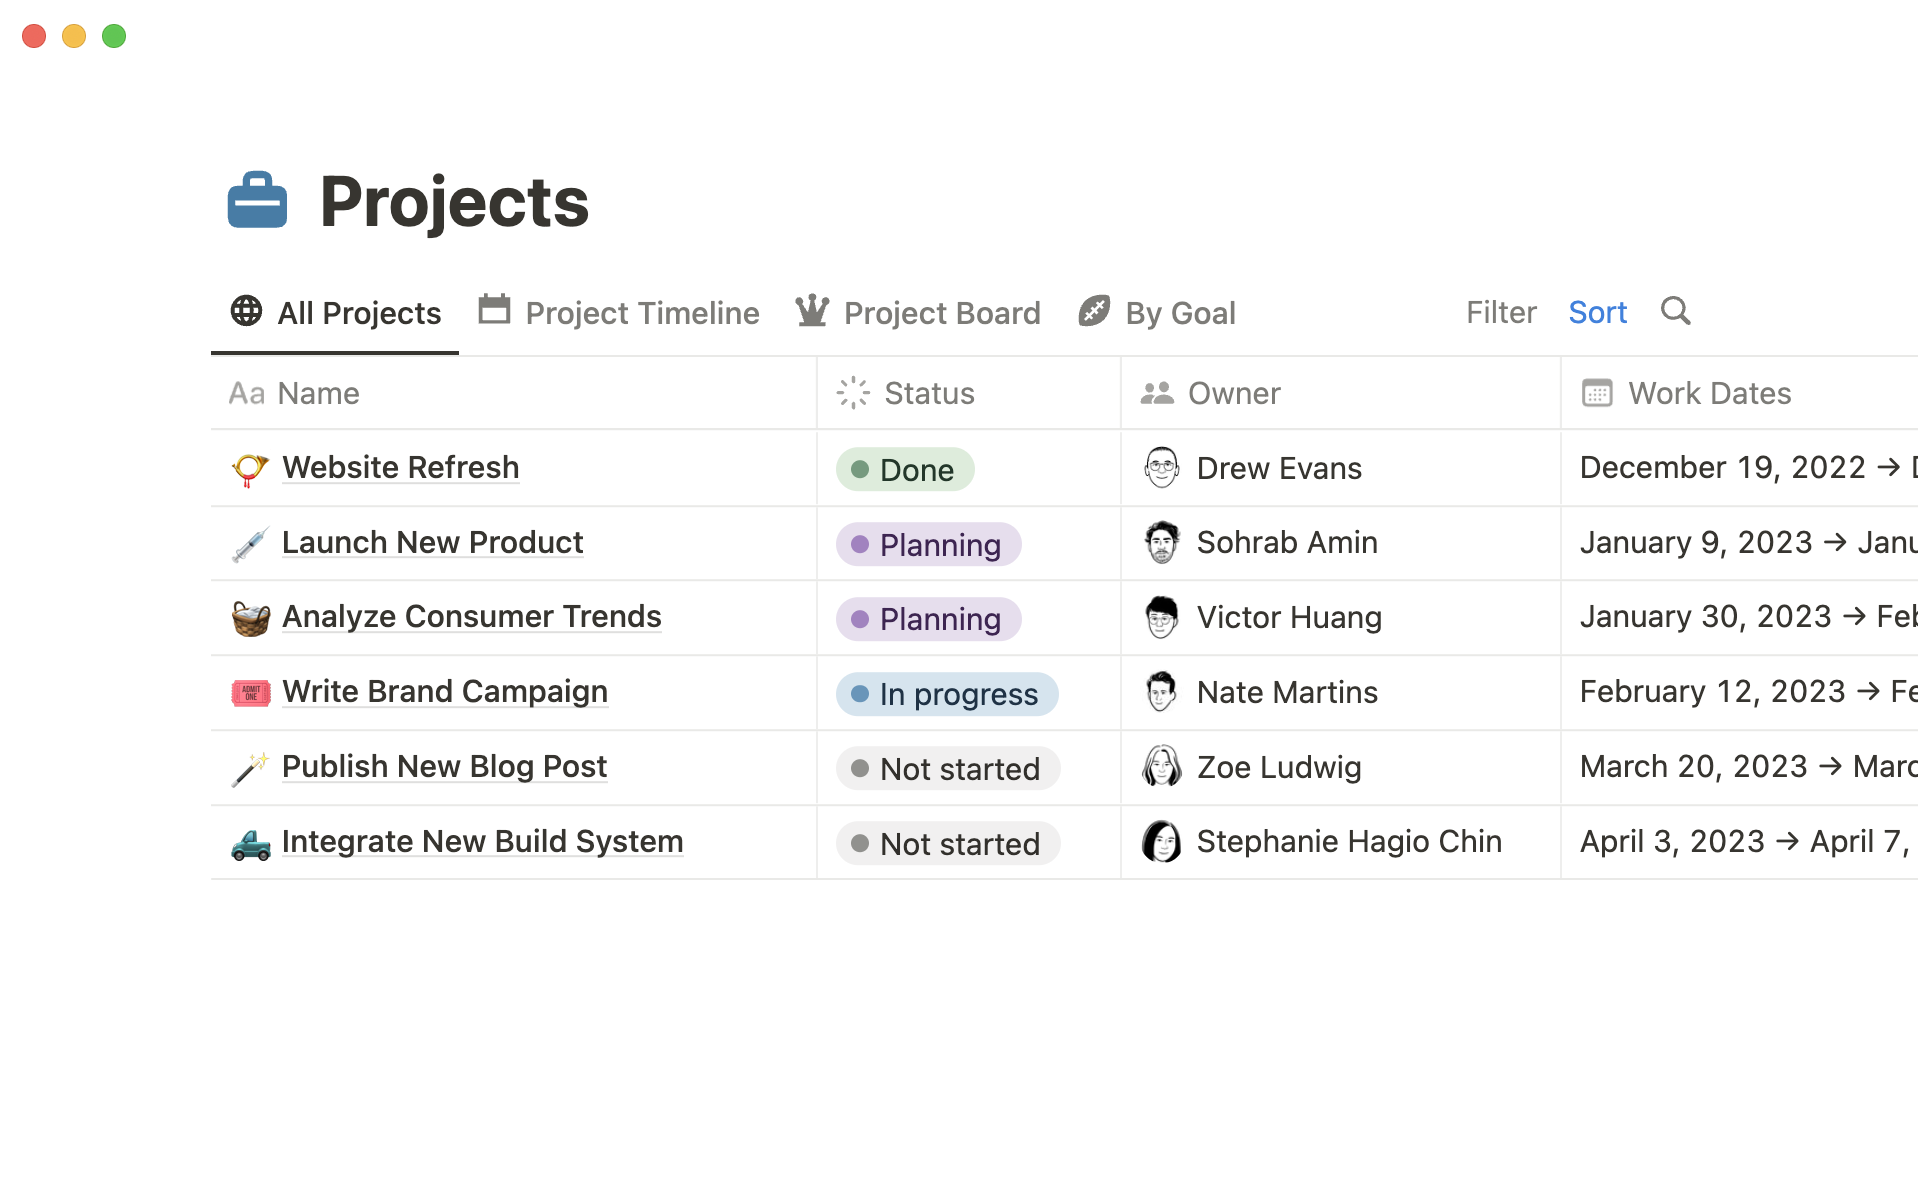 A projects database can include vital information, like project status, owner, and timelines.